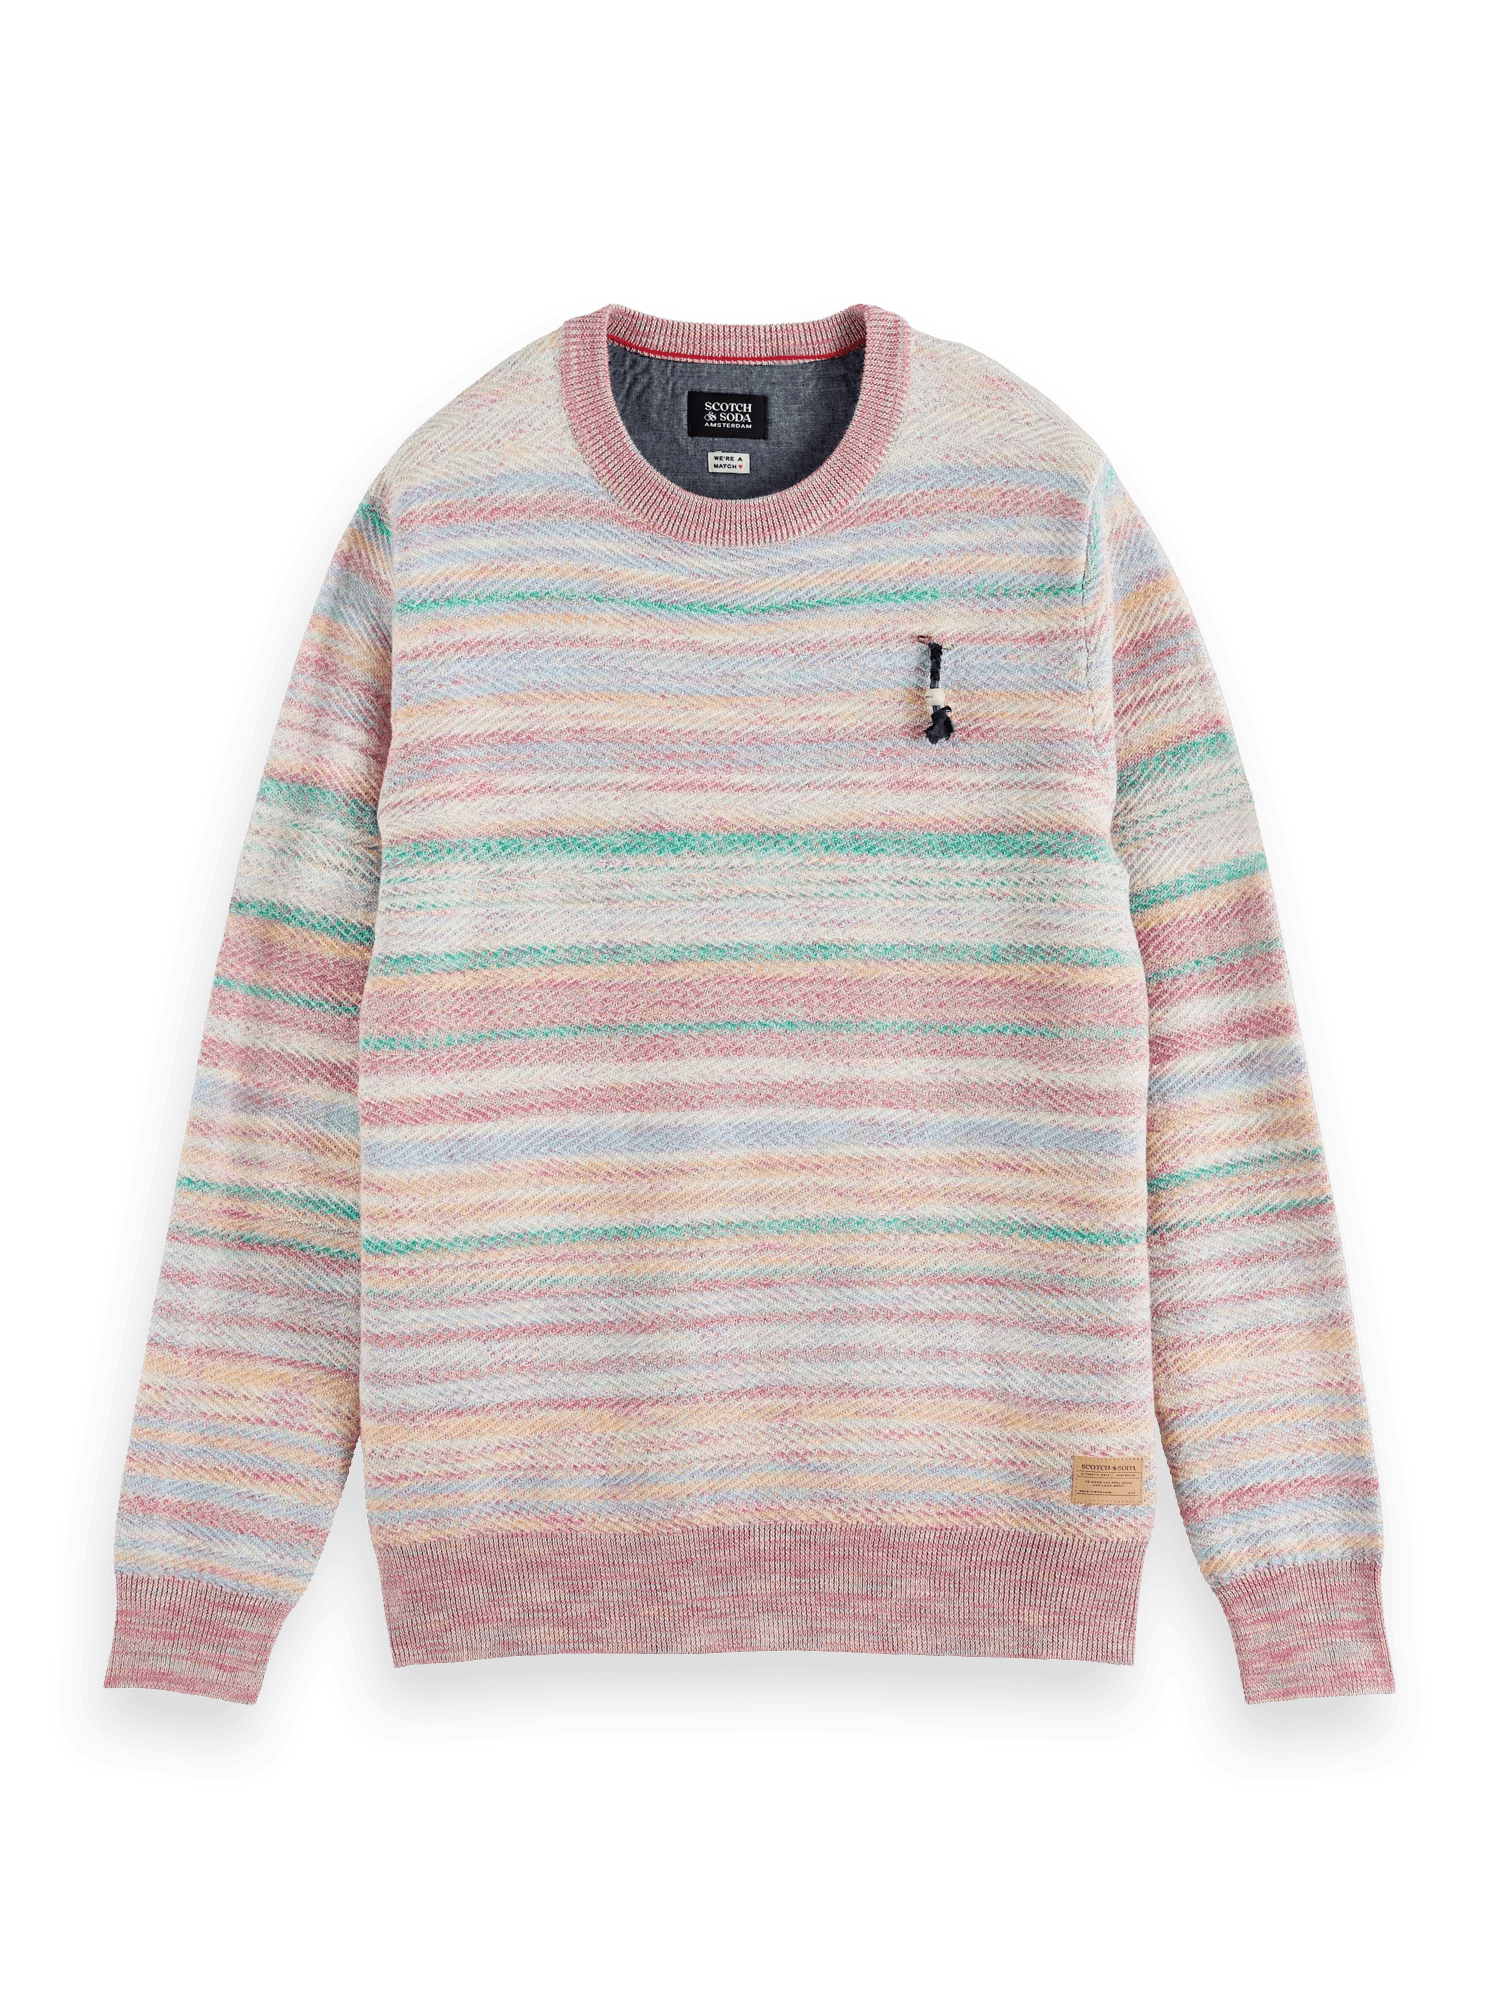 Scotch & Soda Structured knit space-dye crewneck pullover FNT